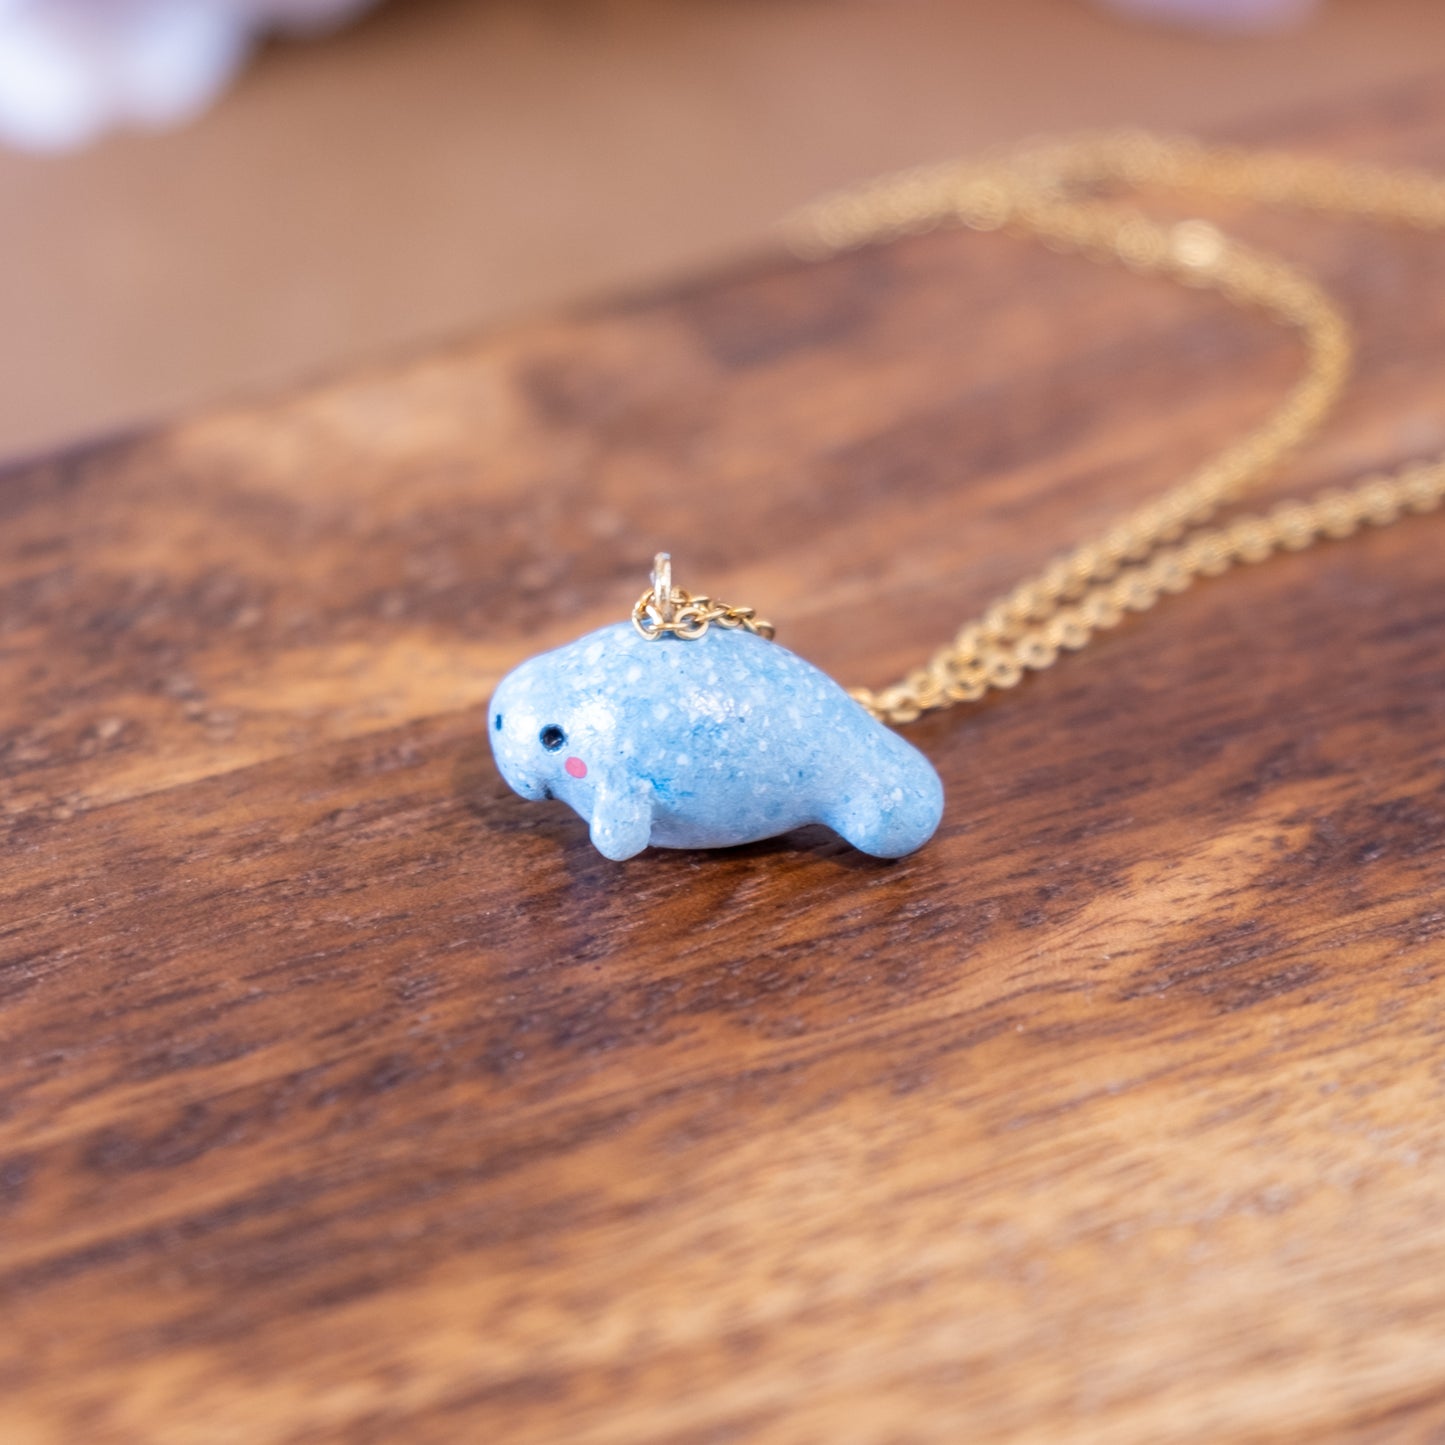 Tiny Lamantin Necklace in Polymer Clay